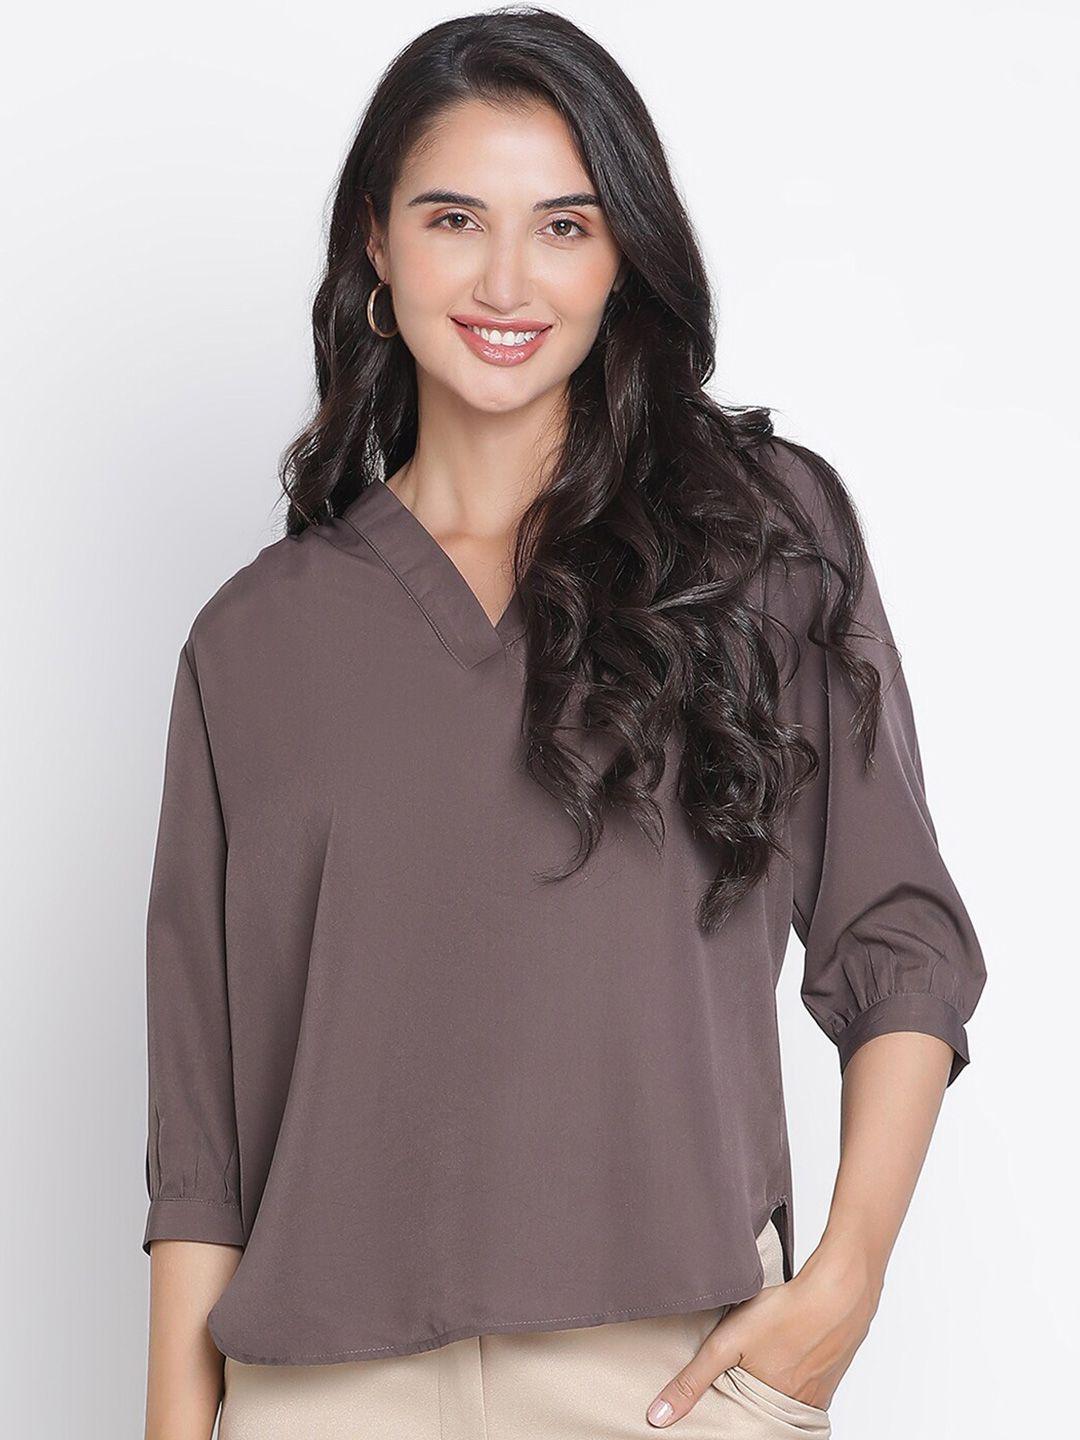 draax fashions v-neck cuffed sleeves gathered detail top